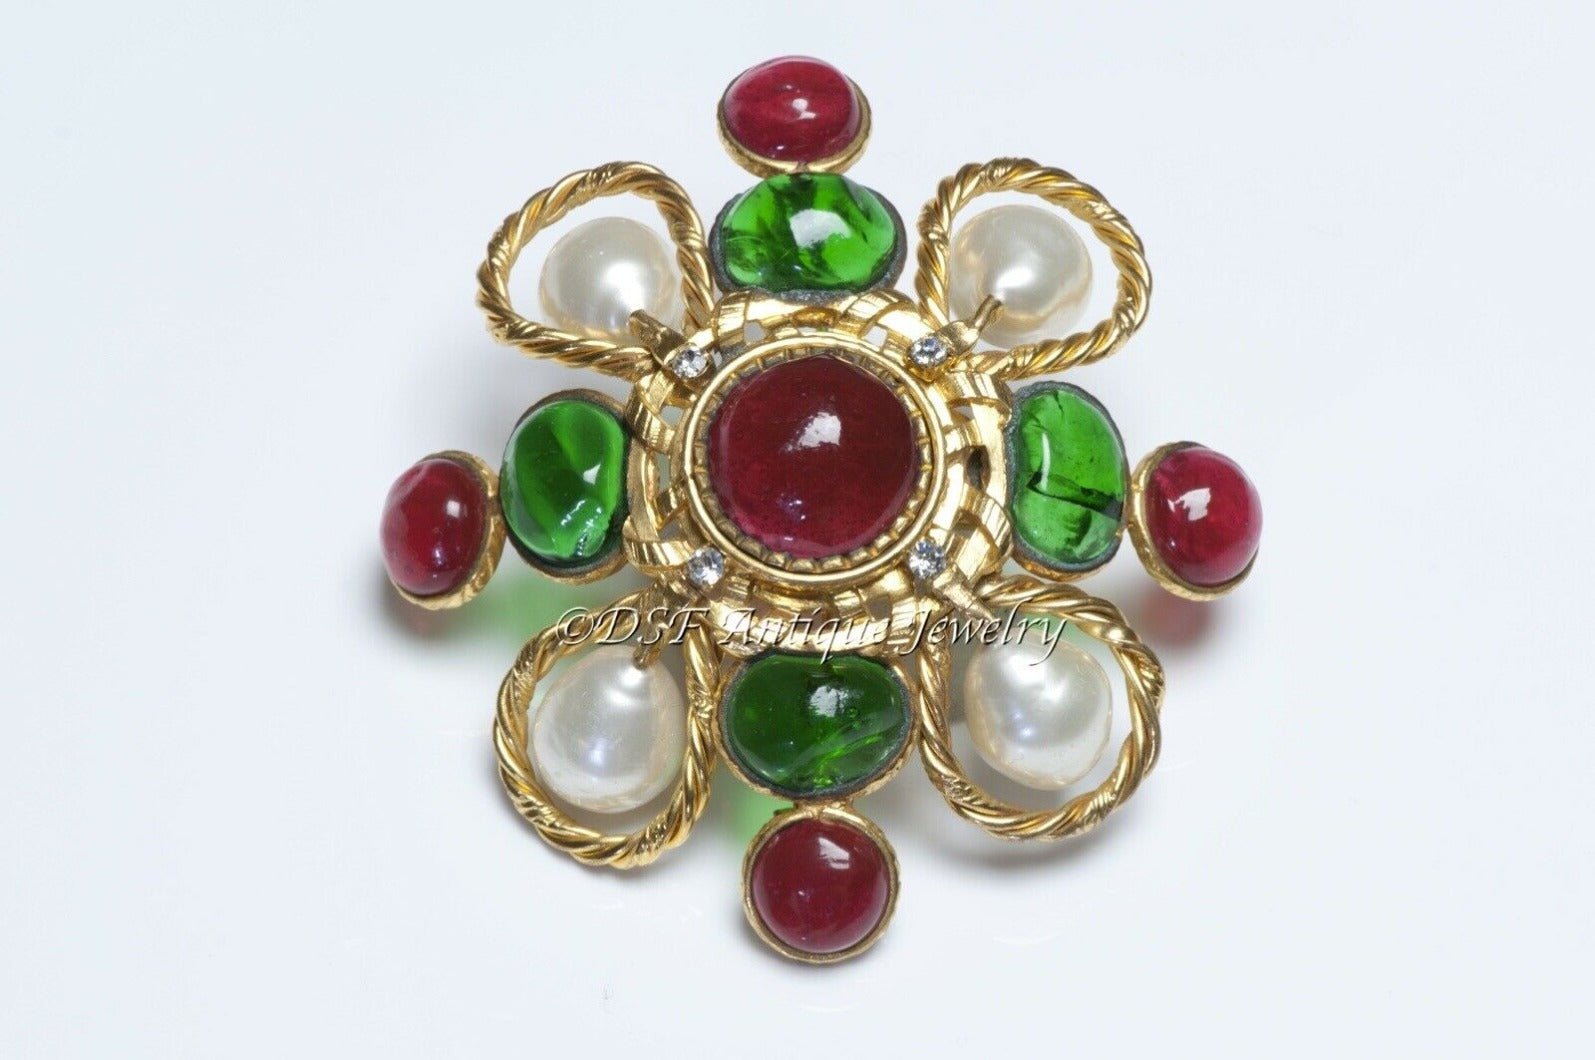 CHANEL Paris 1980’s Maison Gripoix Red Green Glass Faux Pearl Pendant Brooch - DSF Antique Jewelry